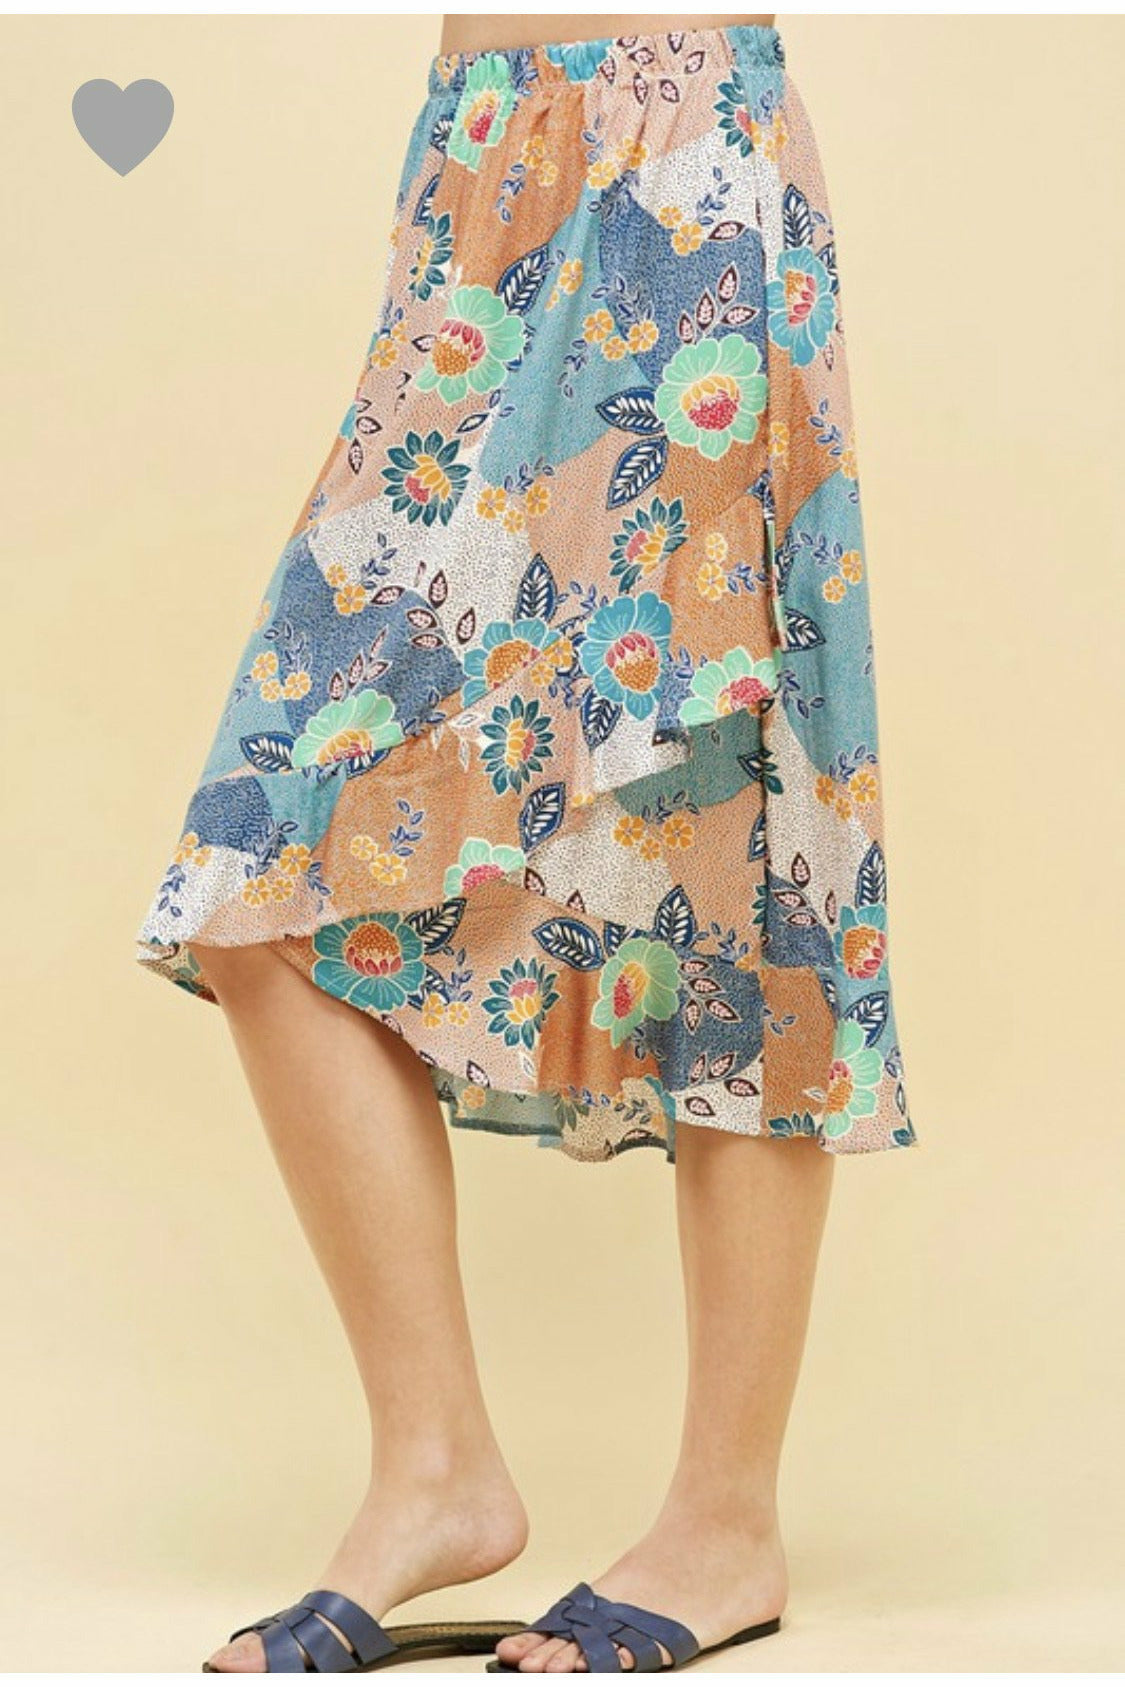 Teal Floral Ruffle Skirt